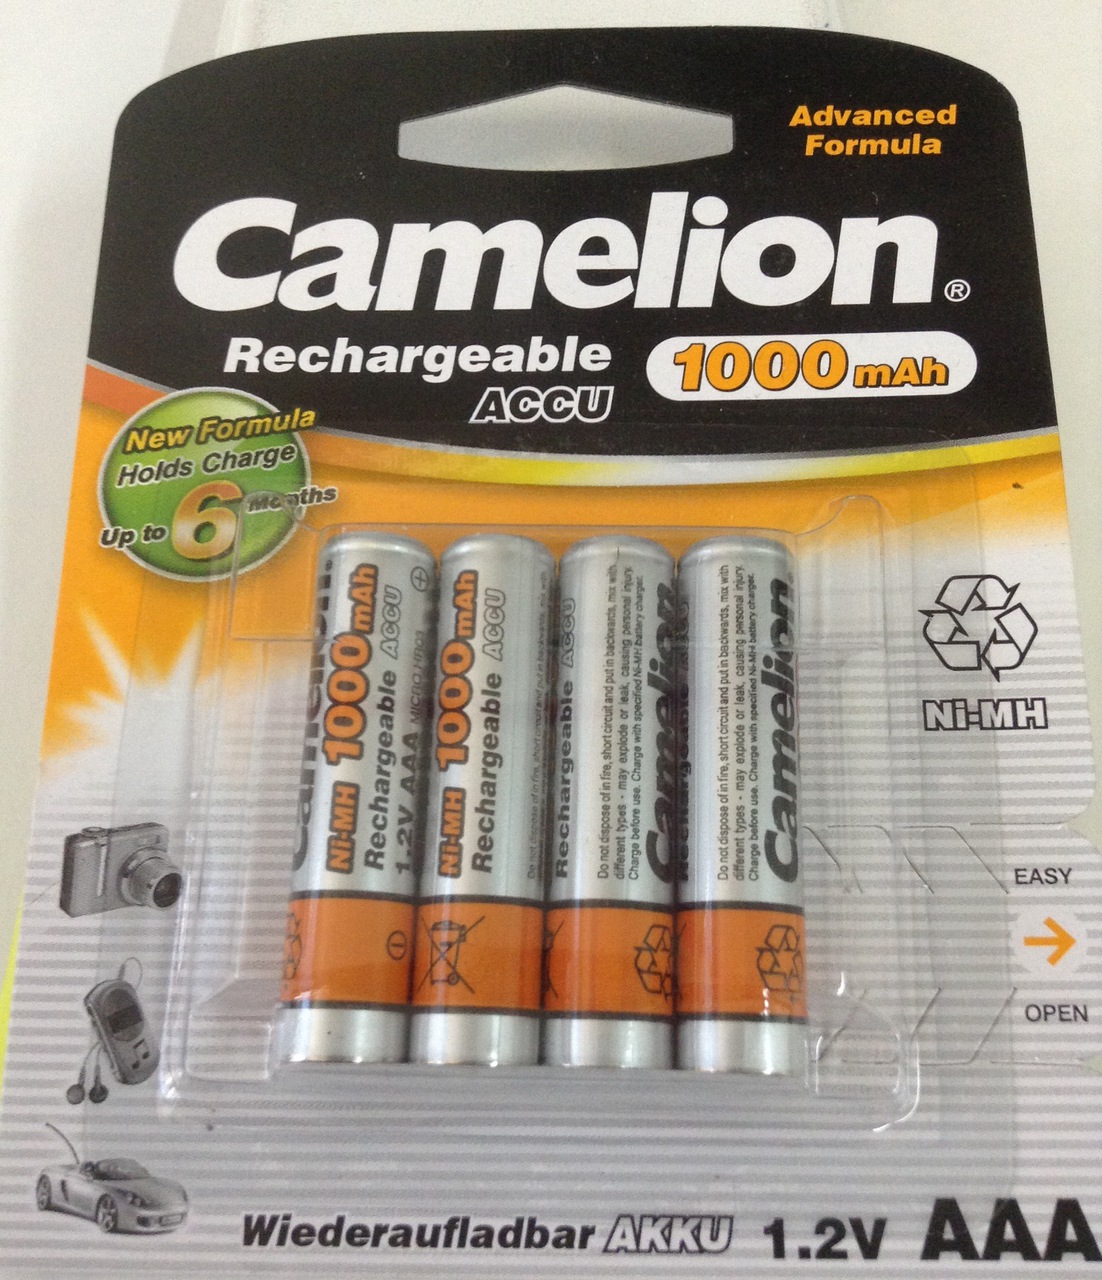 Camelion Advanced Formula AAA Rechargeable NiMH Batteries 1000mAh 8 Pack Retail + FREE SHIPPING!